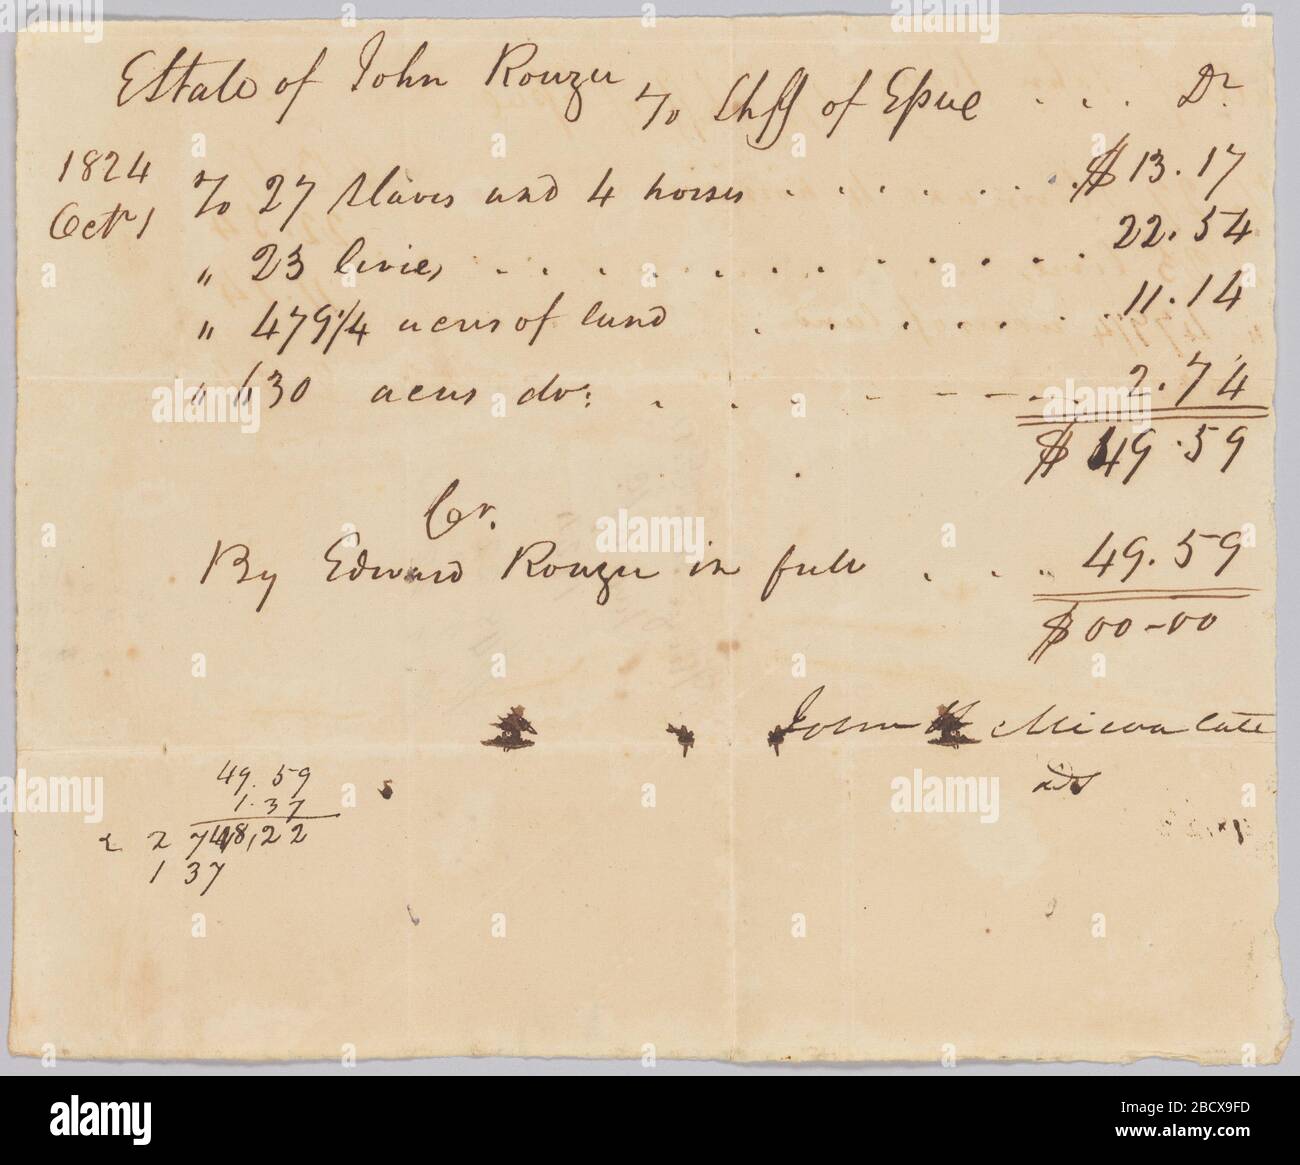 Record of taxes on property including enslaved persons owned by John Rouzee. This document is from a collection of financial papers related to the plantation operations of several generations of the Rouzee Family in Essex County, Virginia. Record of taxes on property including enslaved persons owned by John Rouzee Stock Photo